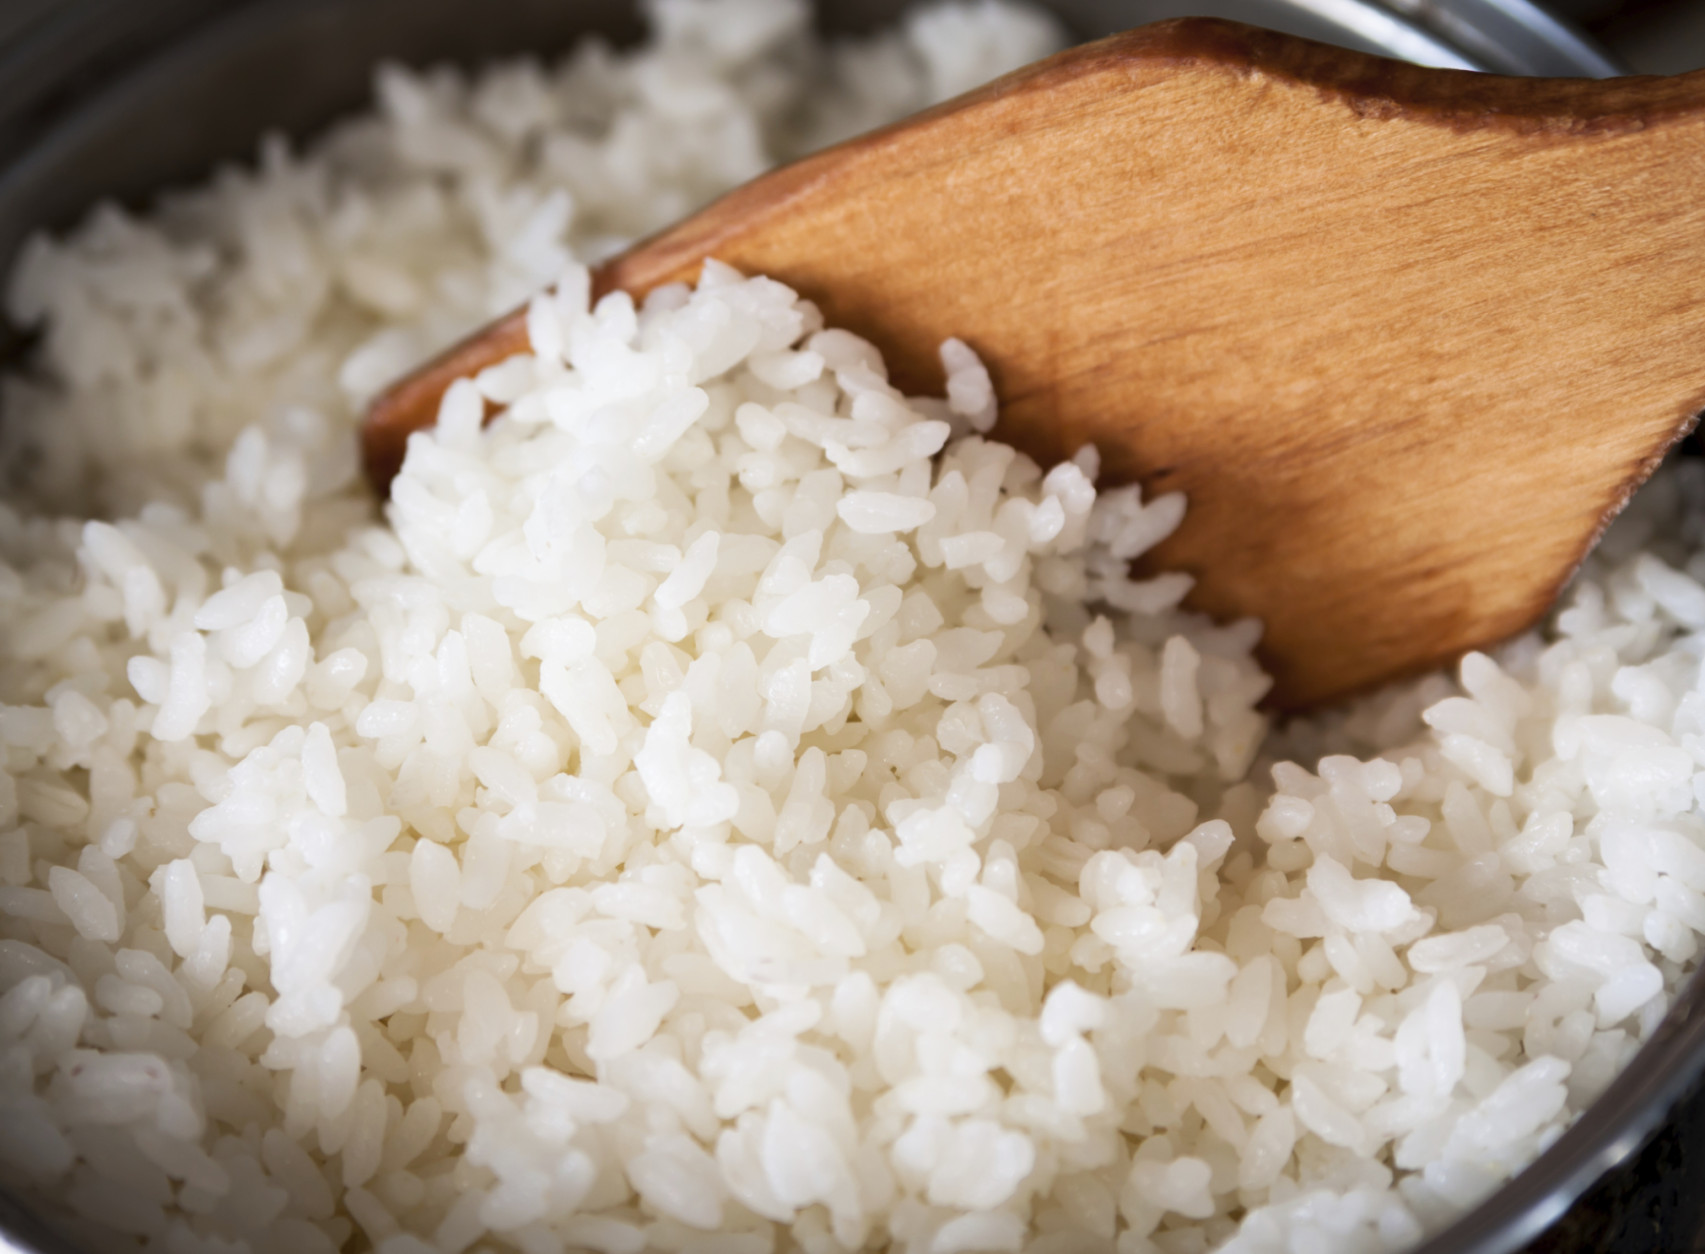 With its long shelf life, rice is another staple you can buy in bulk and keep on hand to add to imaginative dishes. (Thinkstock)